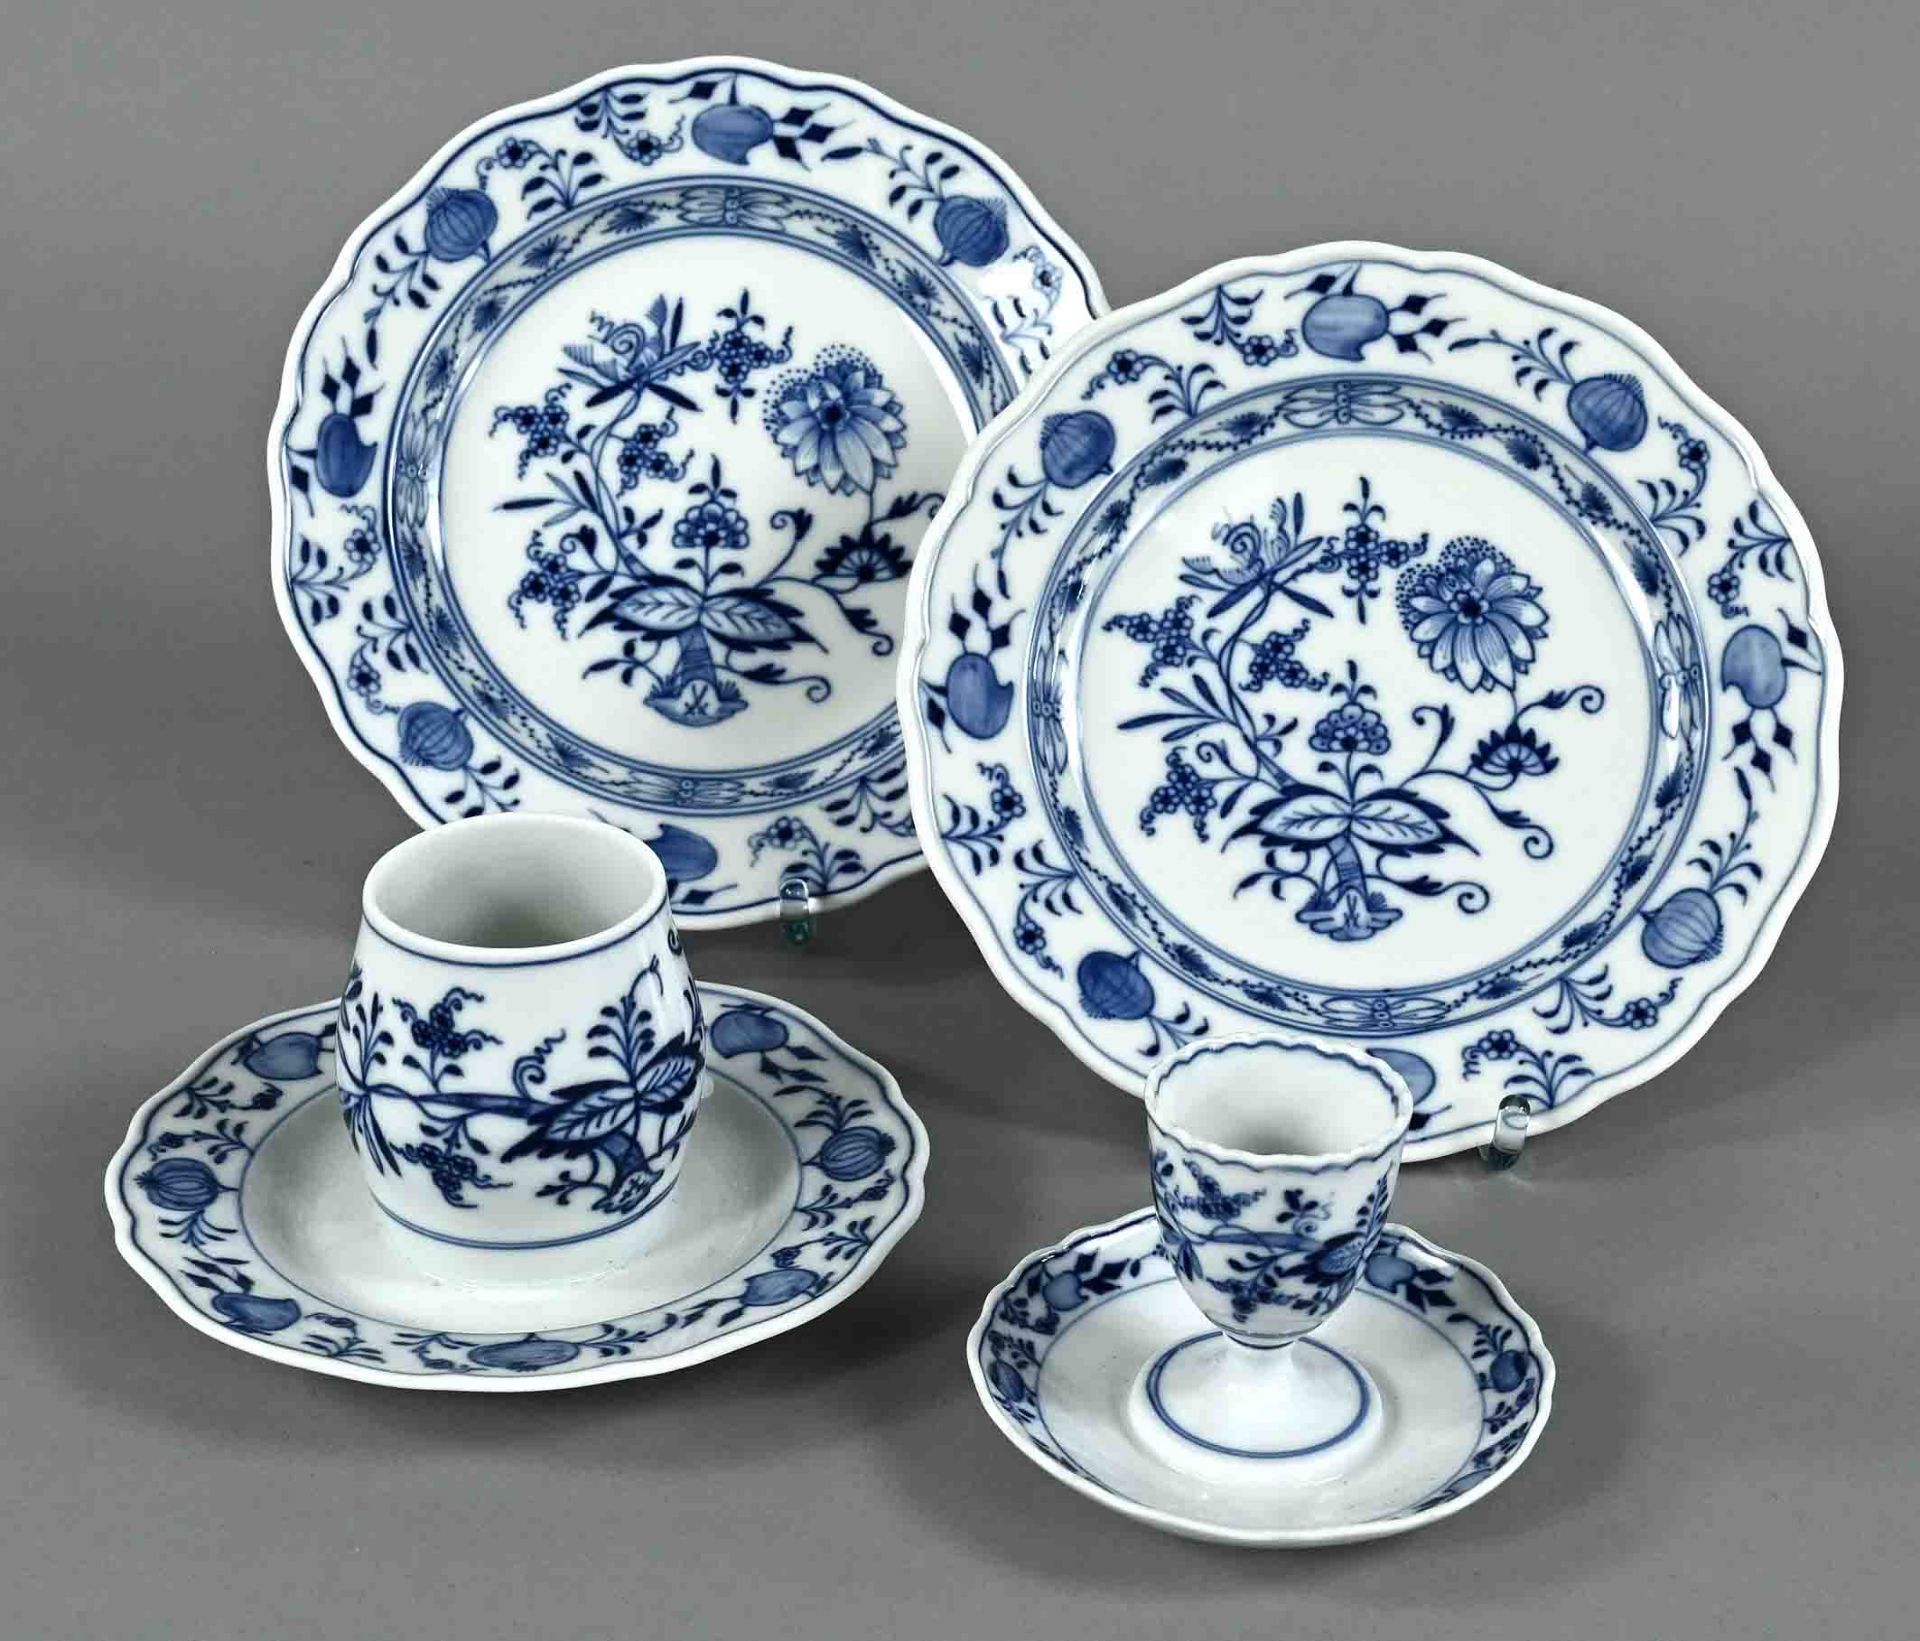 Mixed selection of 4 pieces Meissen porcelain, different sword marks, 1st choice and other qualitys